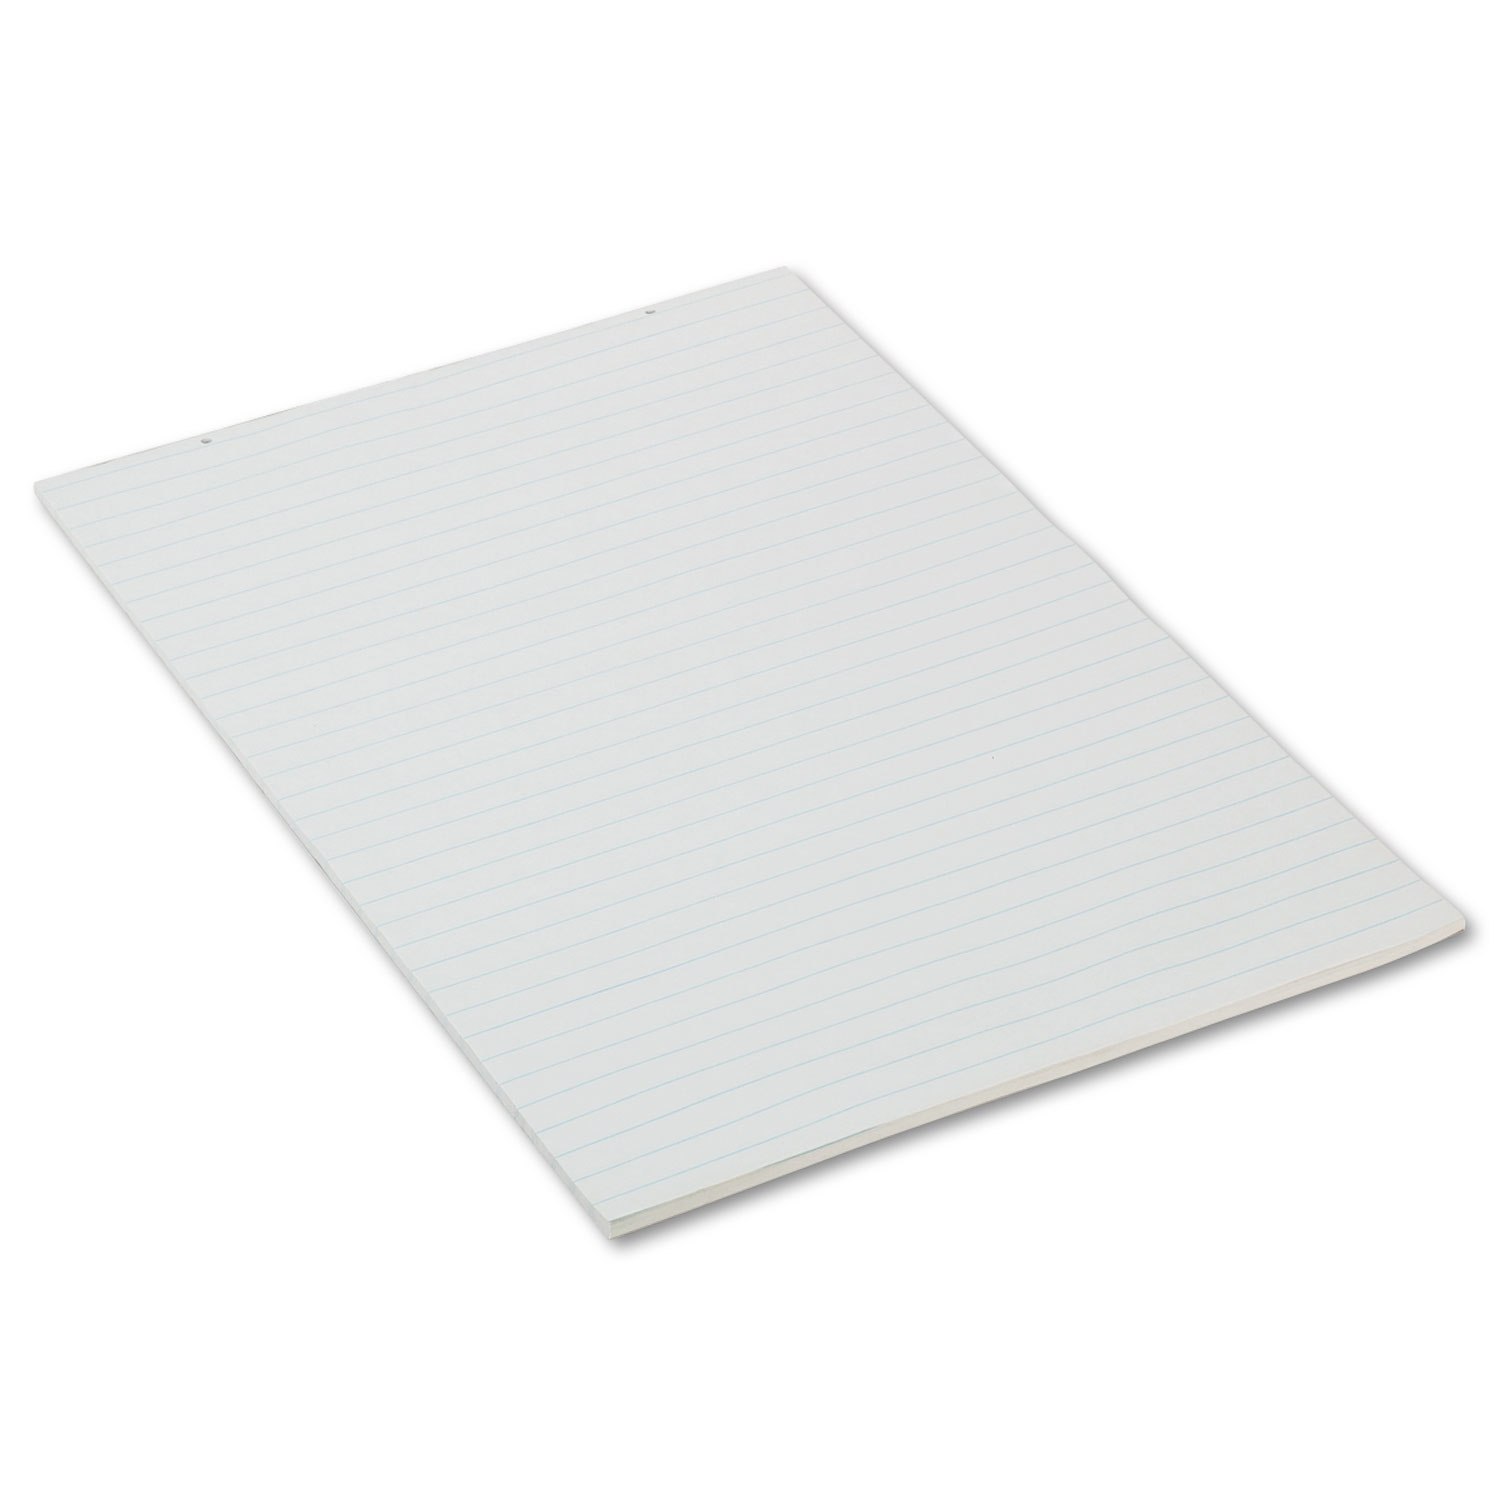 Primary Chart Pad, 1in Short Rule, 24 x 36, White, 100 Sheets